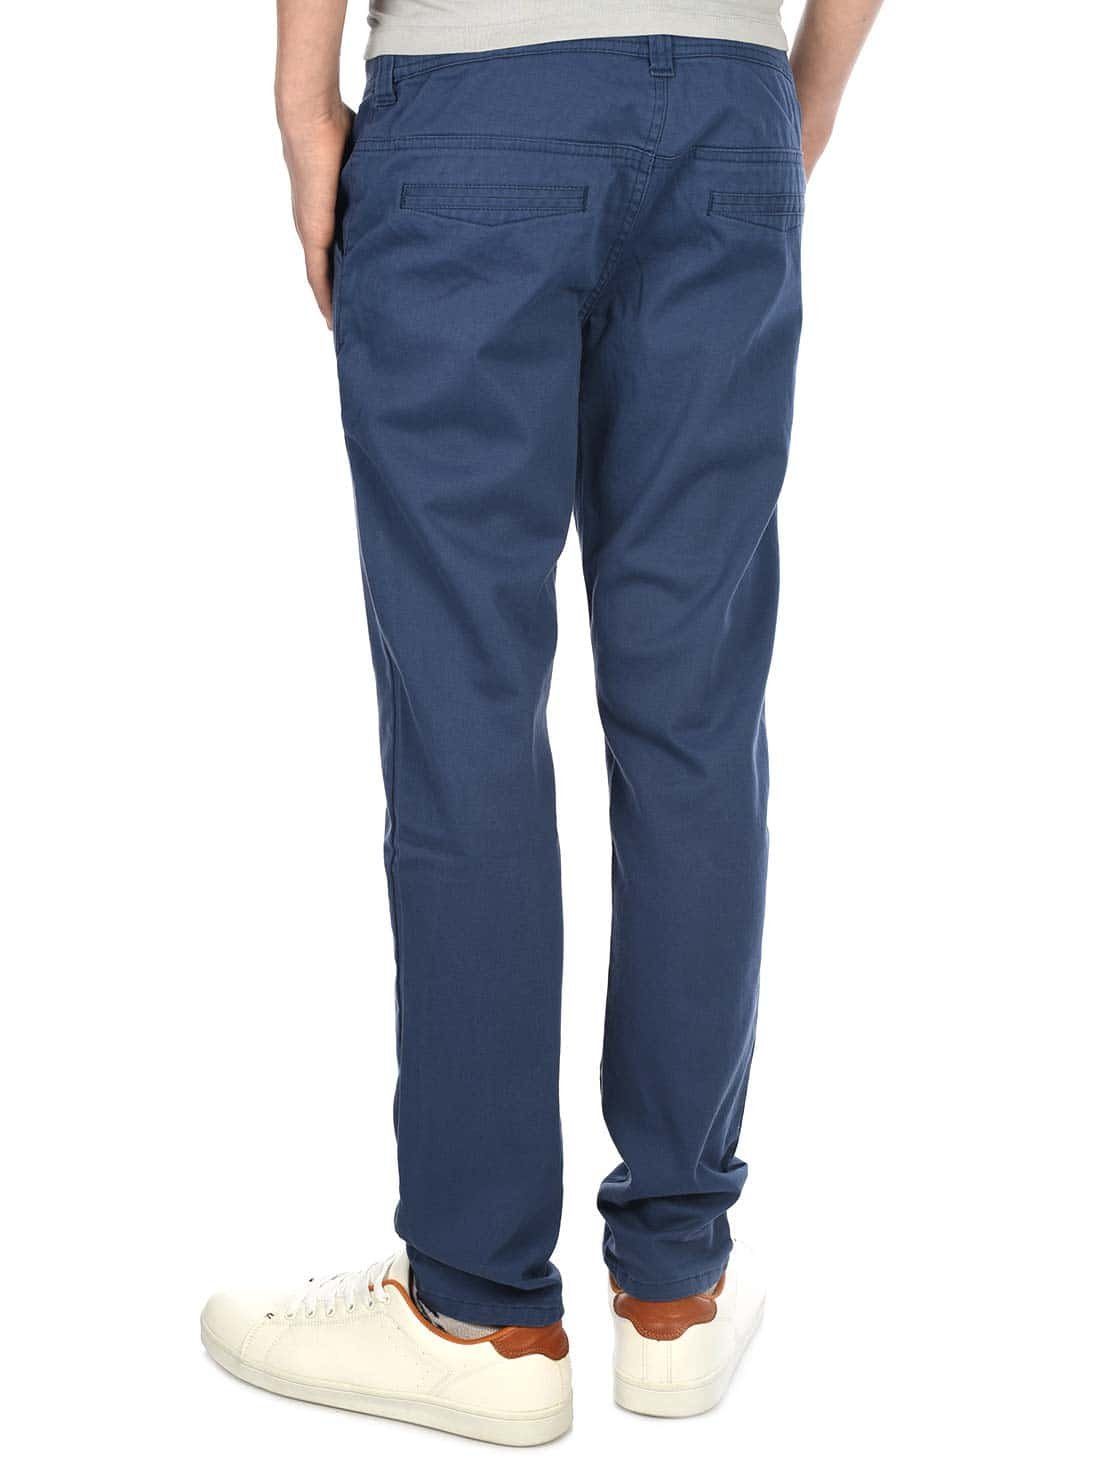 BEZLIT Chinohose Jungen Hose casual Chino Jeansblau (1-tlg)